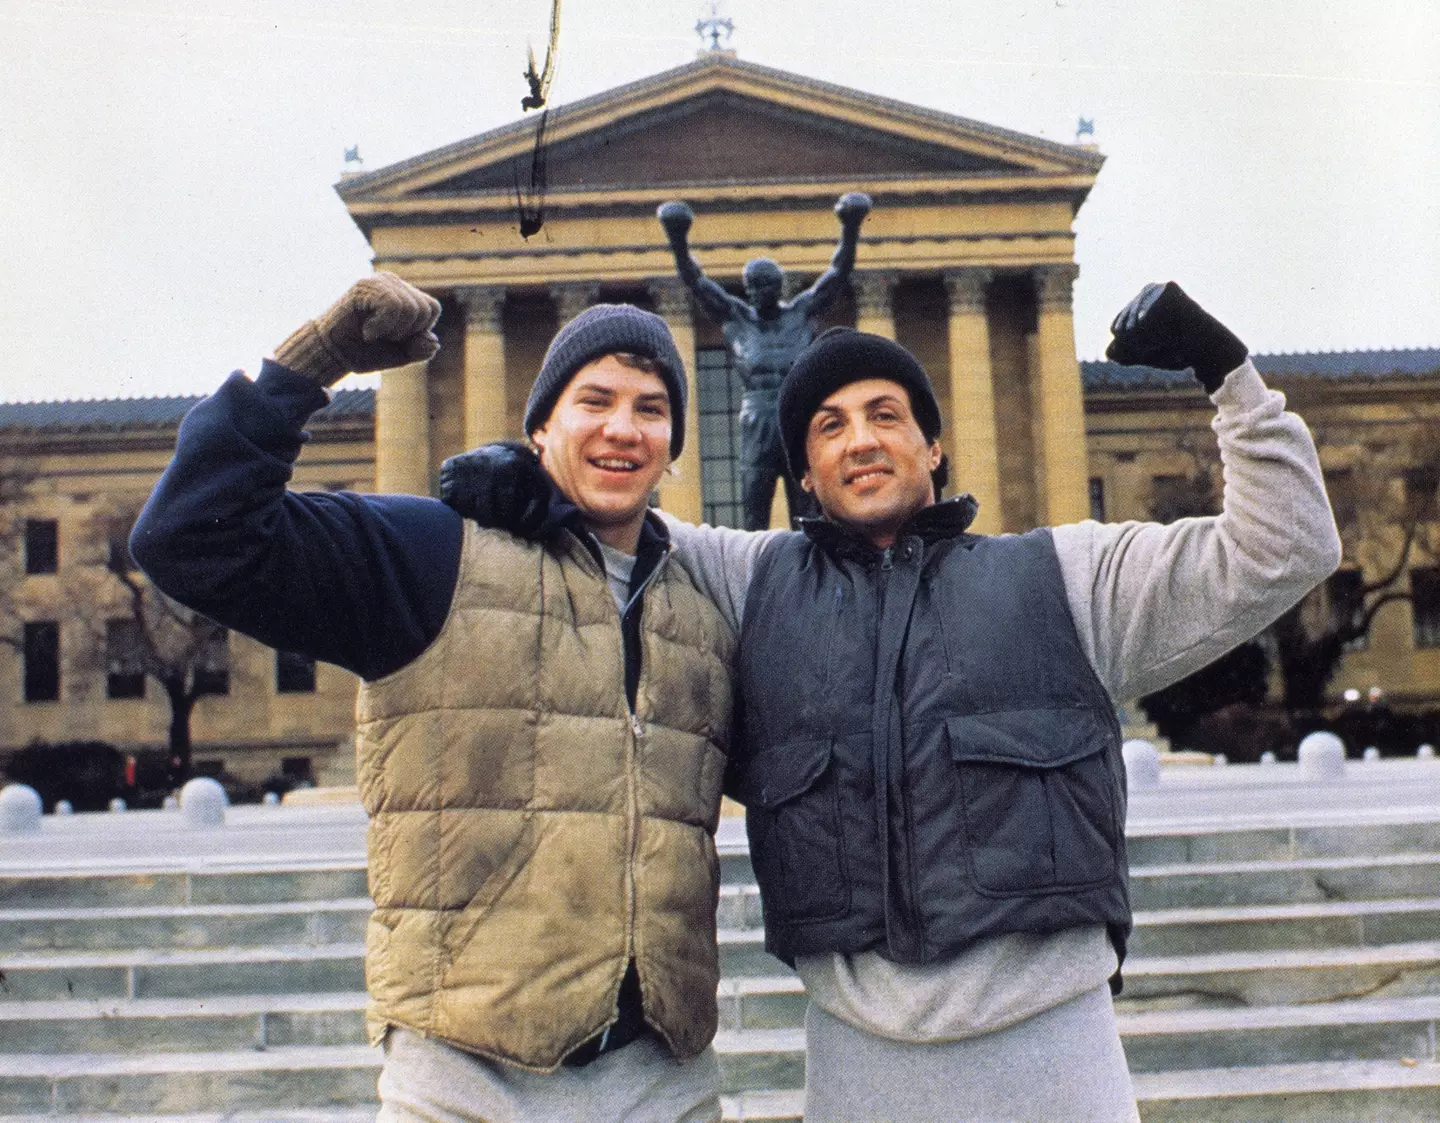 Tommy Morrison was chosen to star in a Rocky movie.